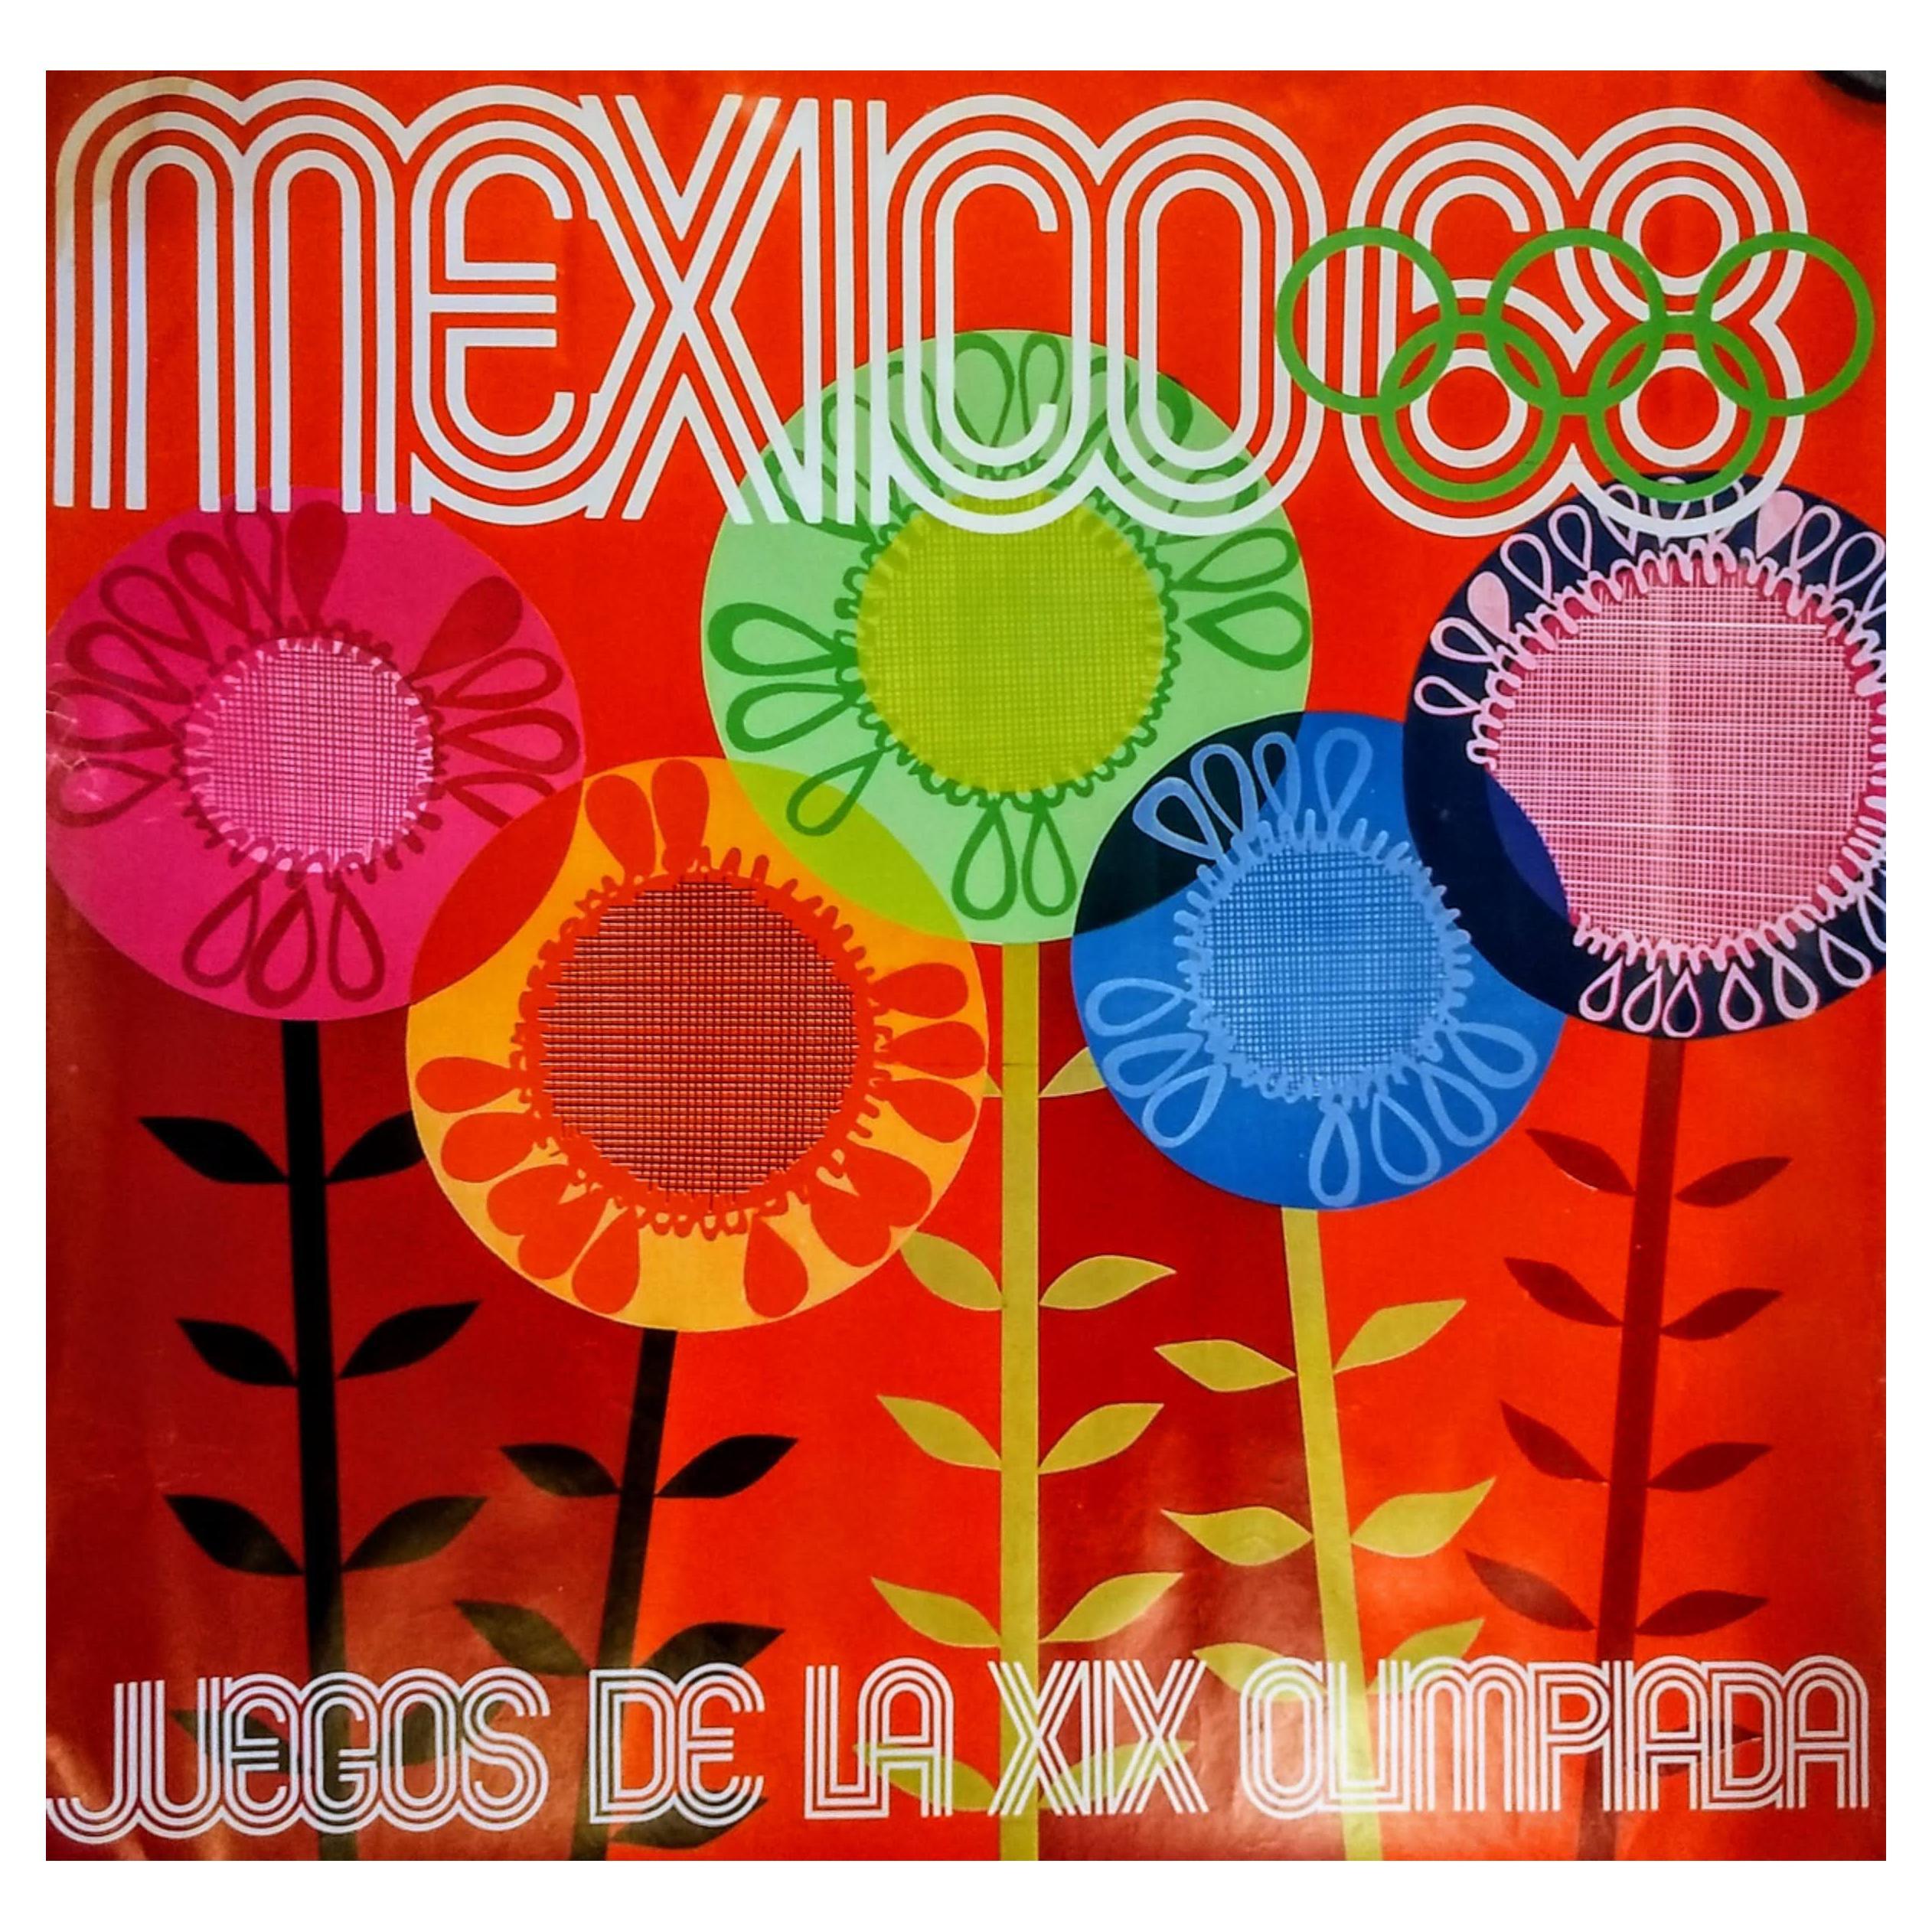 Original Tourism Posters Promoting Mexico 68 Olympic Games Bursting with Colors